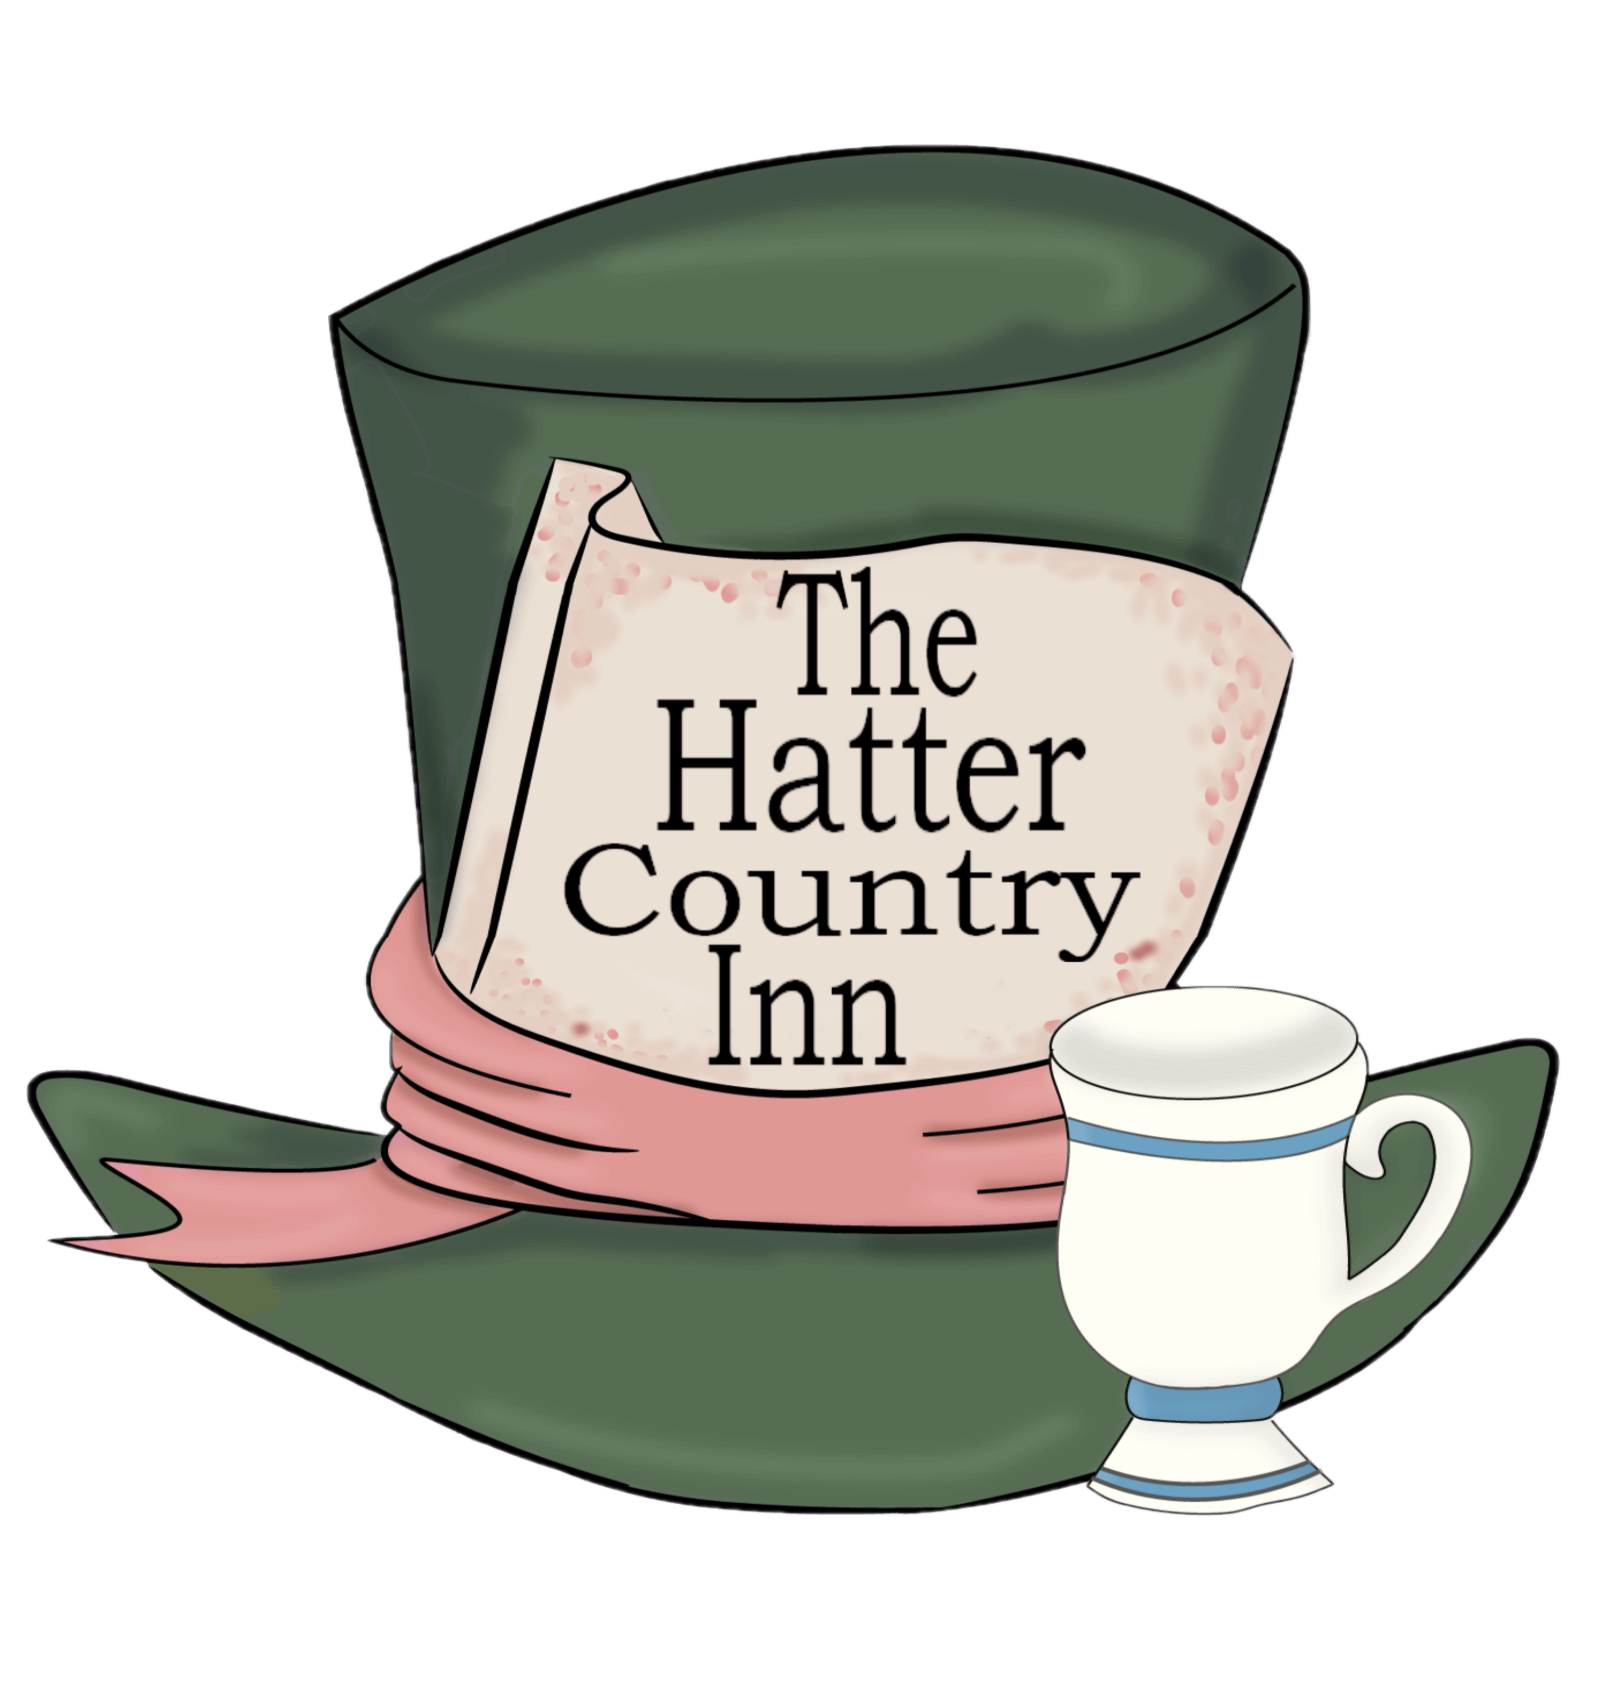 The Hatter Country Inn Logo on a Transparent Background